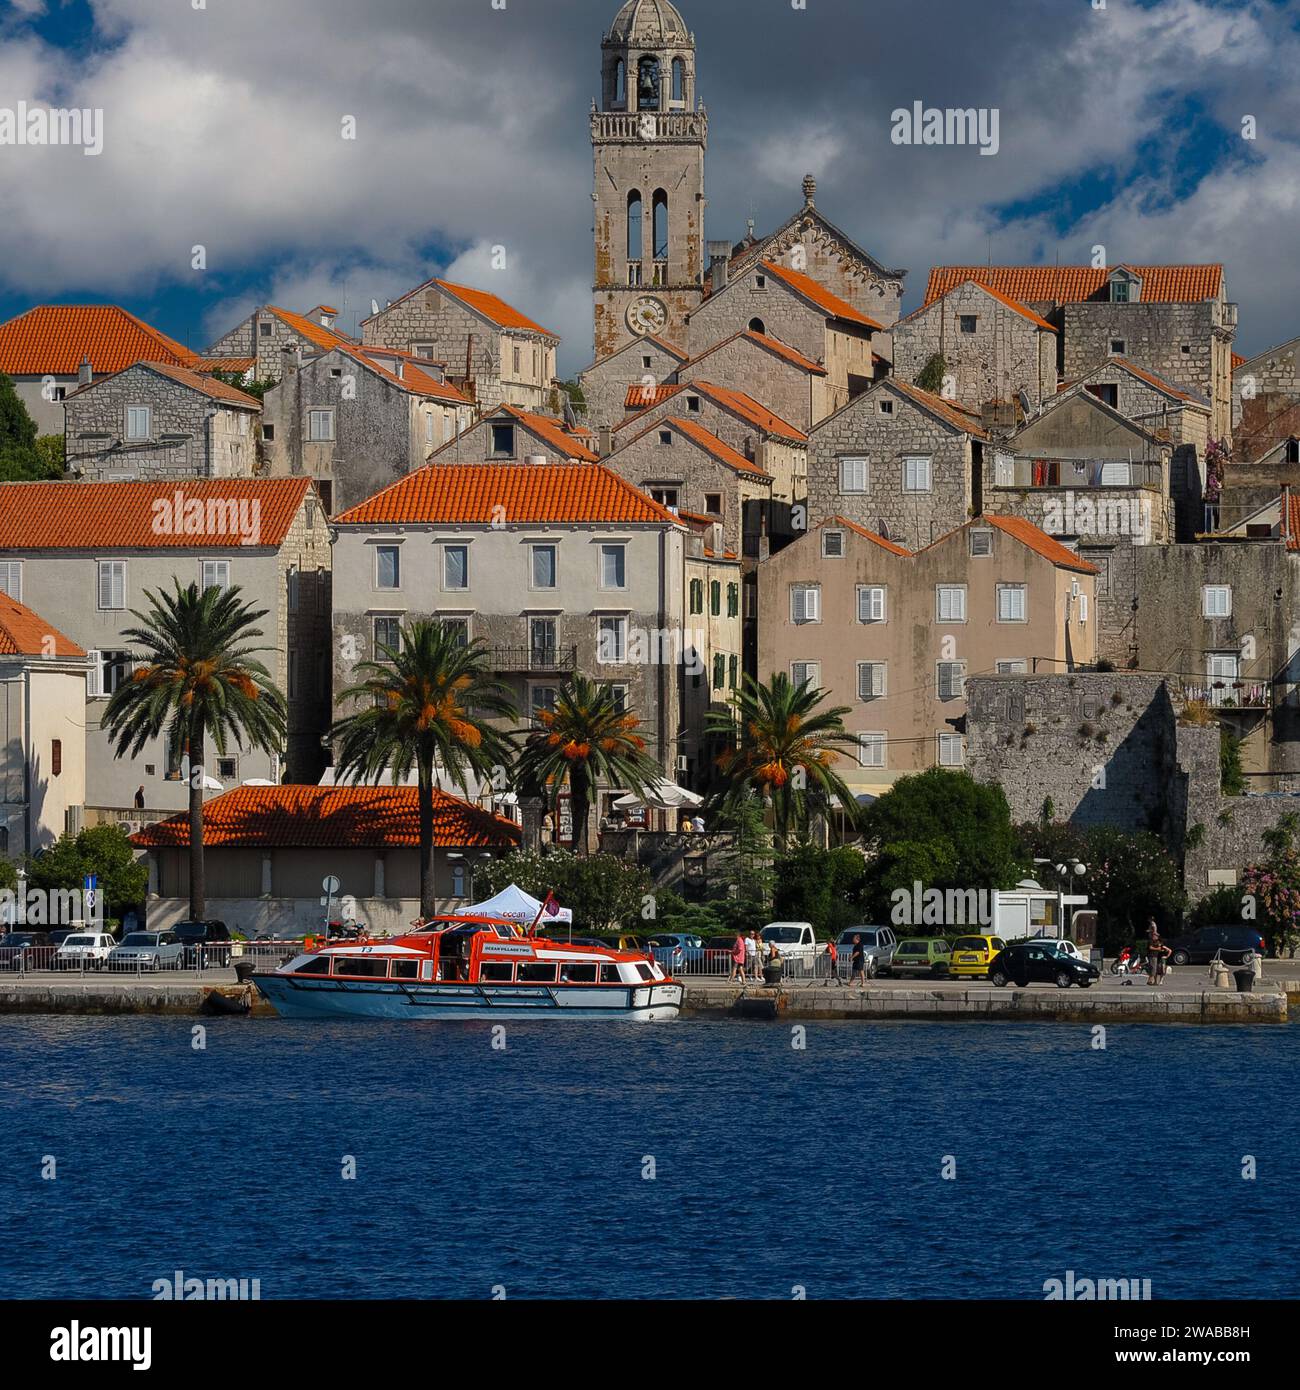 The campanile of the Cathedral of St Mark rises above red roofs in the town of Korčula in Dubrovnik-Neretva county, Croatia.  Also visible in this image is the apex of the cathedral’s western gable, its sumptuous decoration added in the later 1400s. Stock Photo